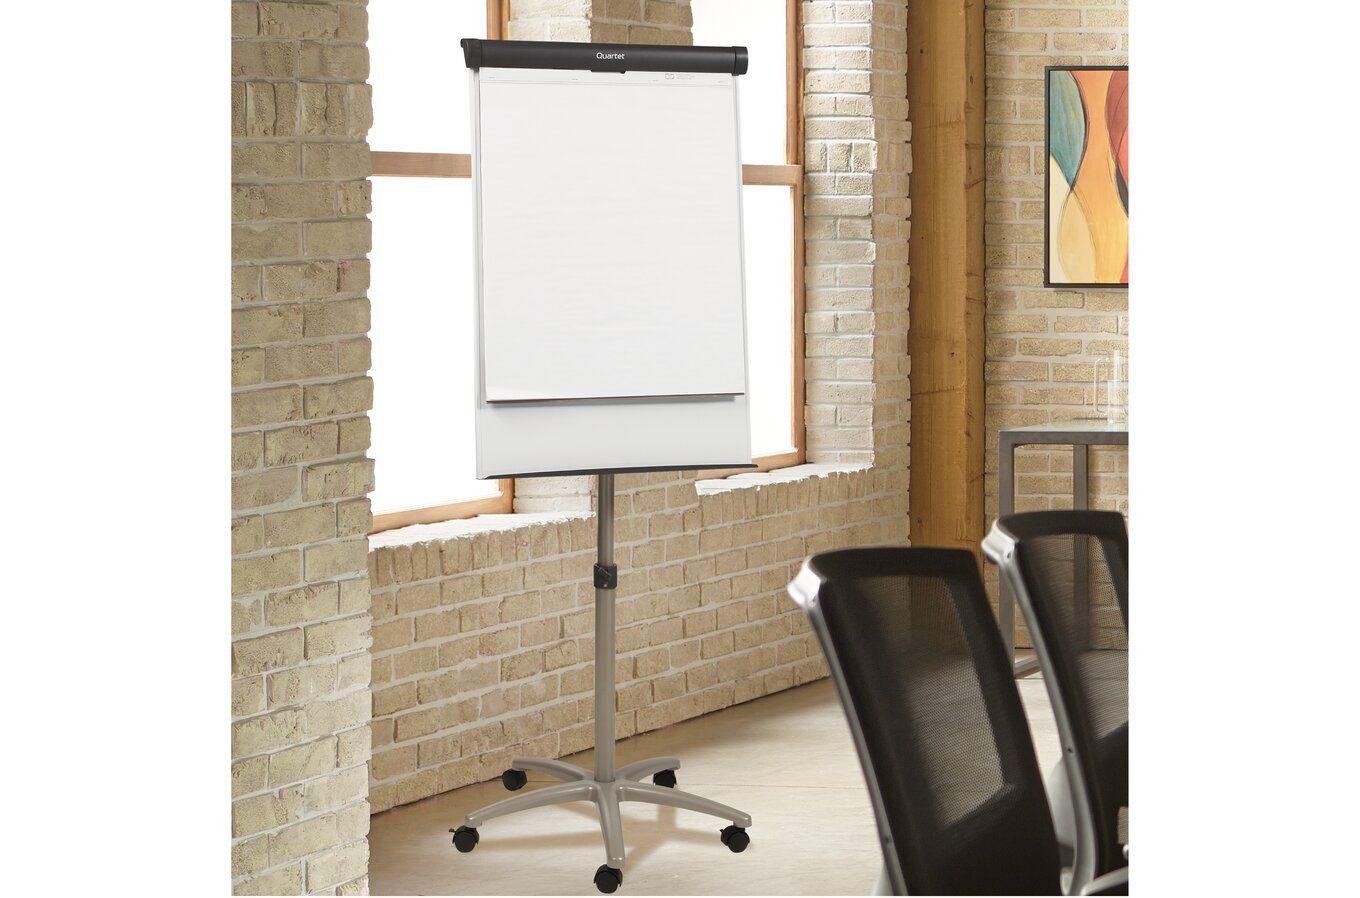 A-frame Flipchart Easel with Whiteboard - IDEC Displays